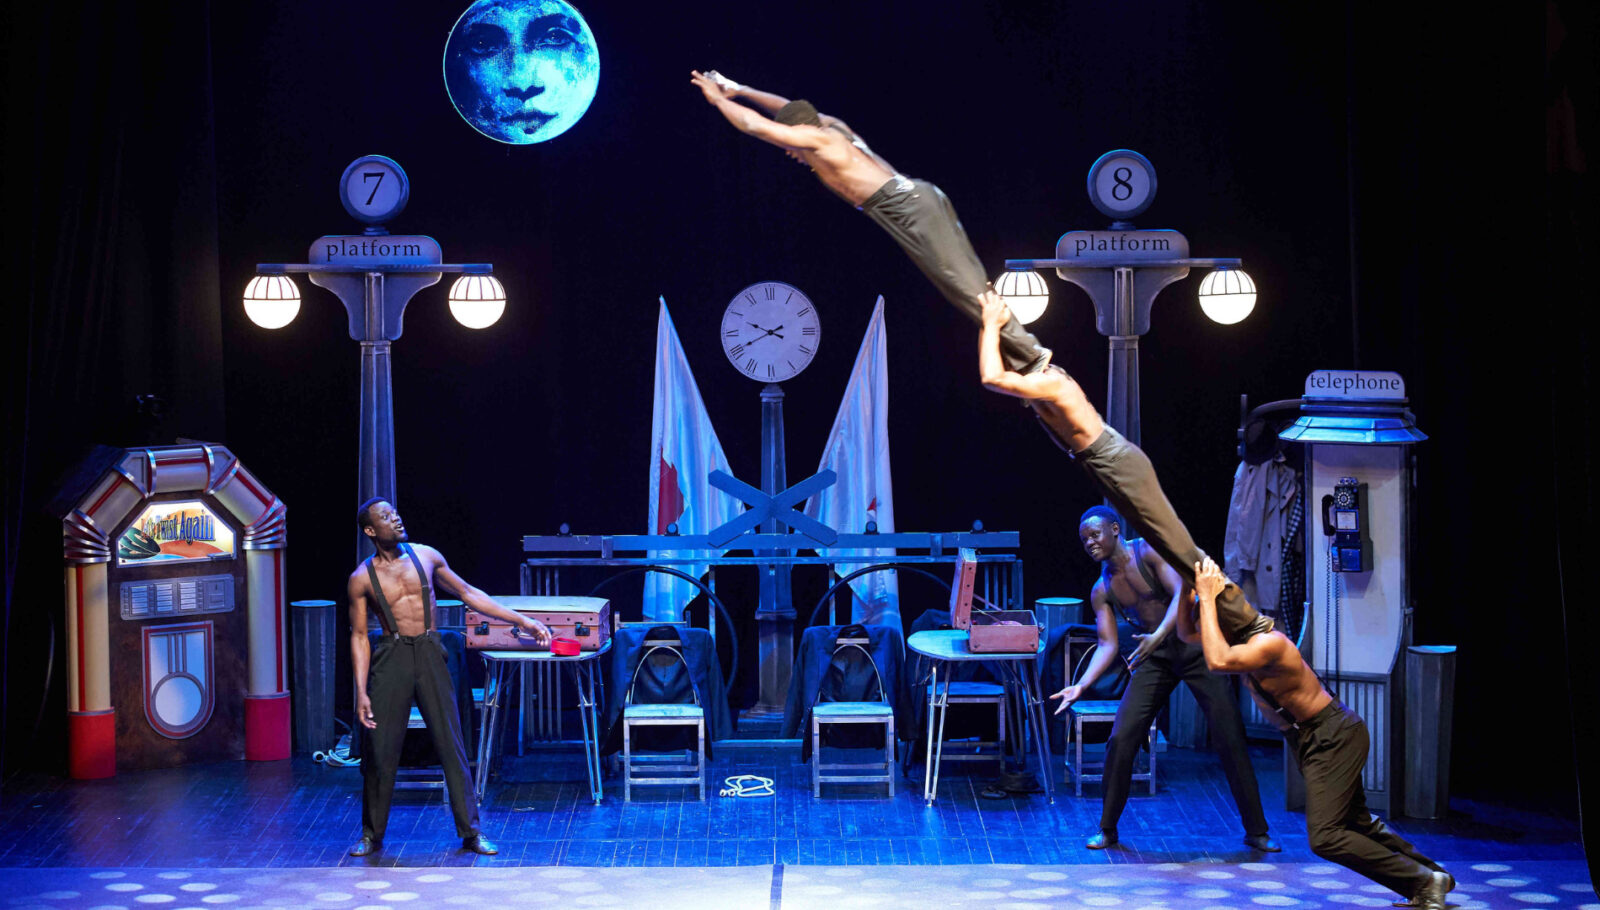 The Black Blues Brothers circus show features five young Kenyan male acrobats performing stunts on a Cotton Club-inspired stage